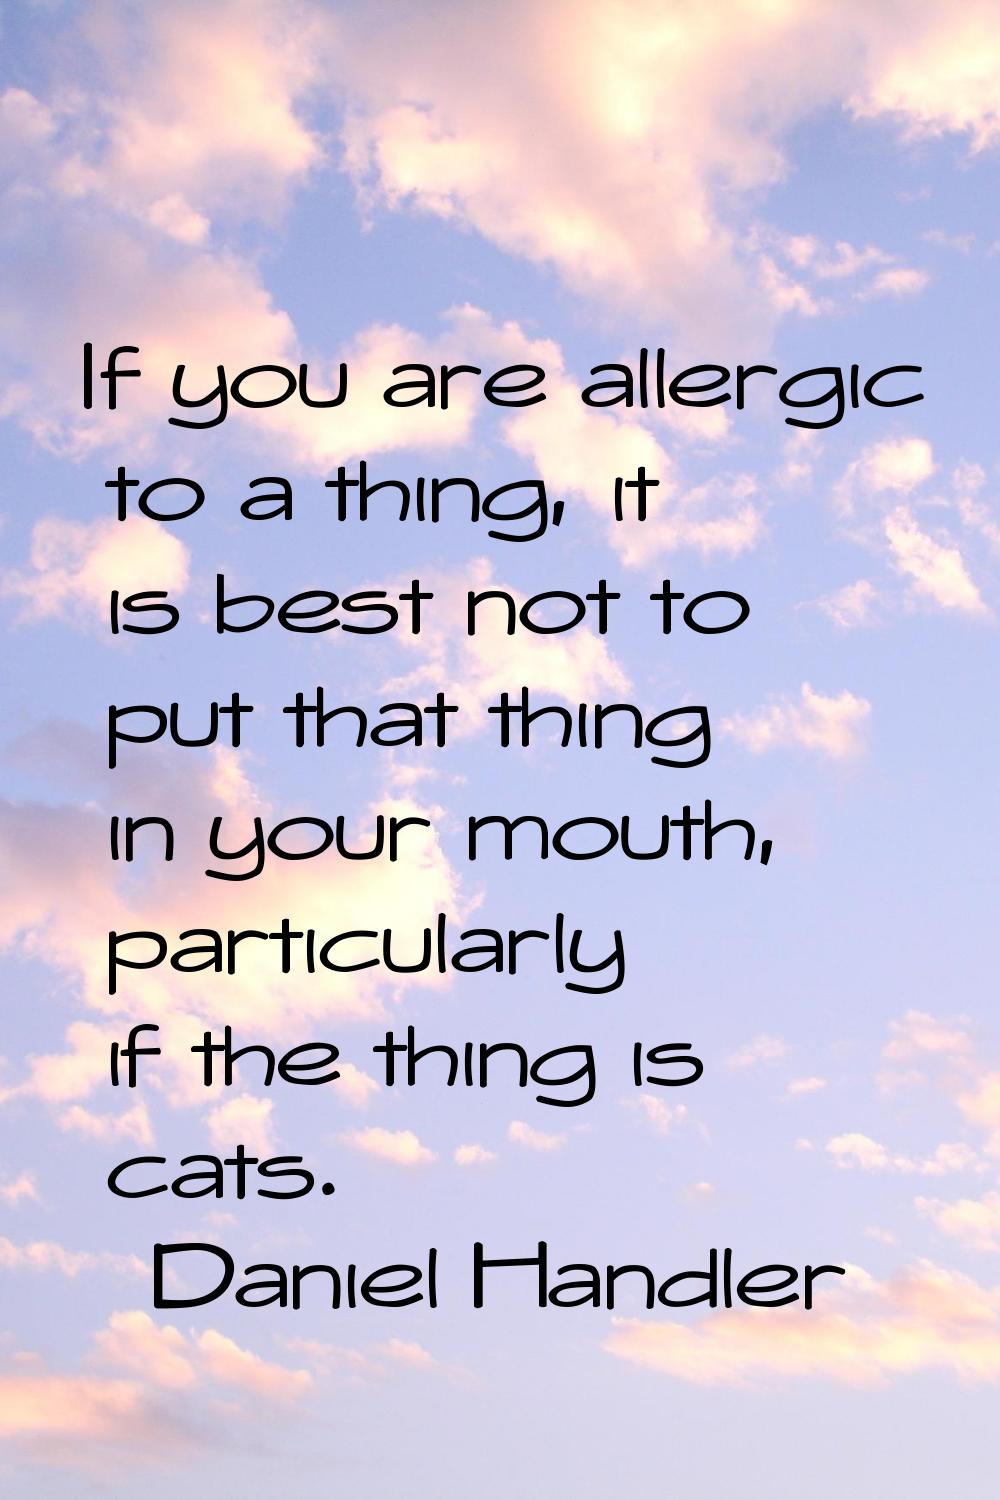 If you are allergic to a thing, it is best not to put that thing in your mouth, particularly if the